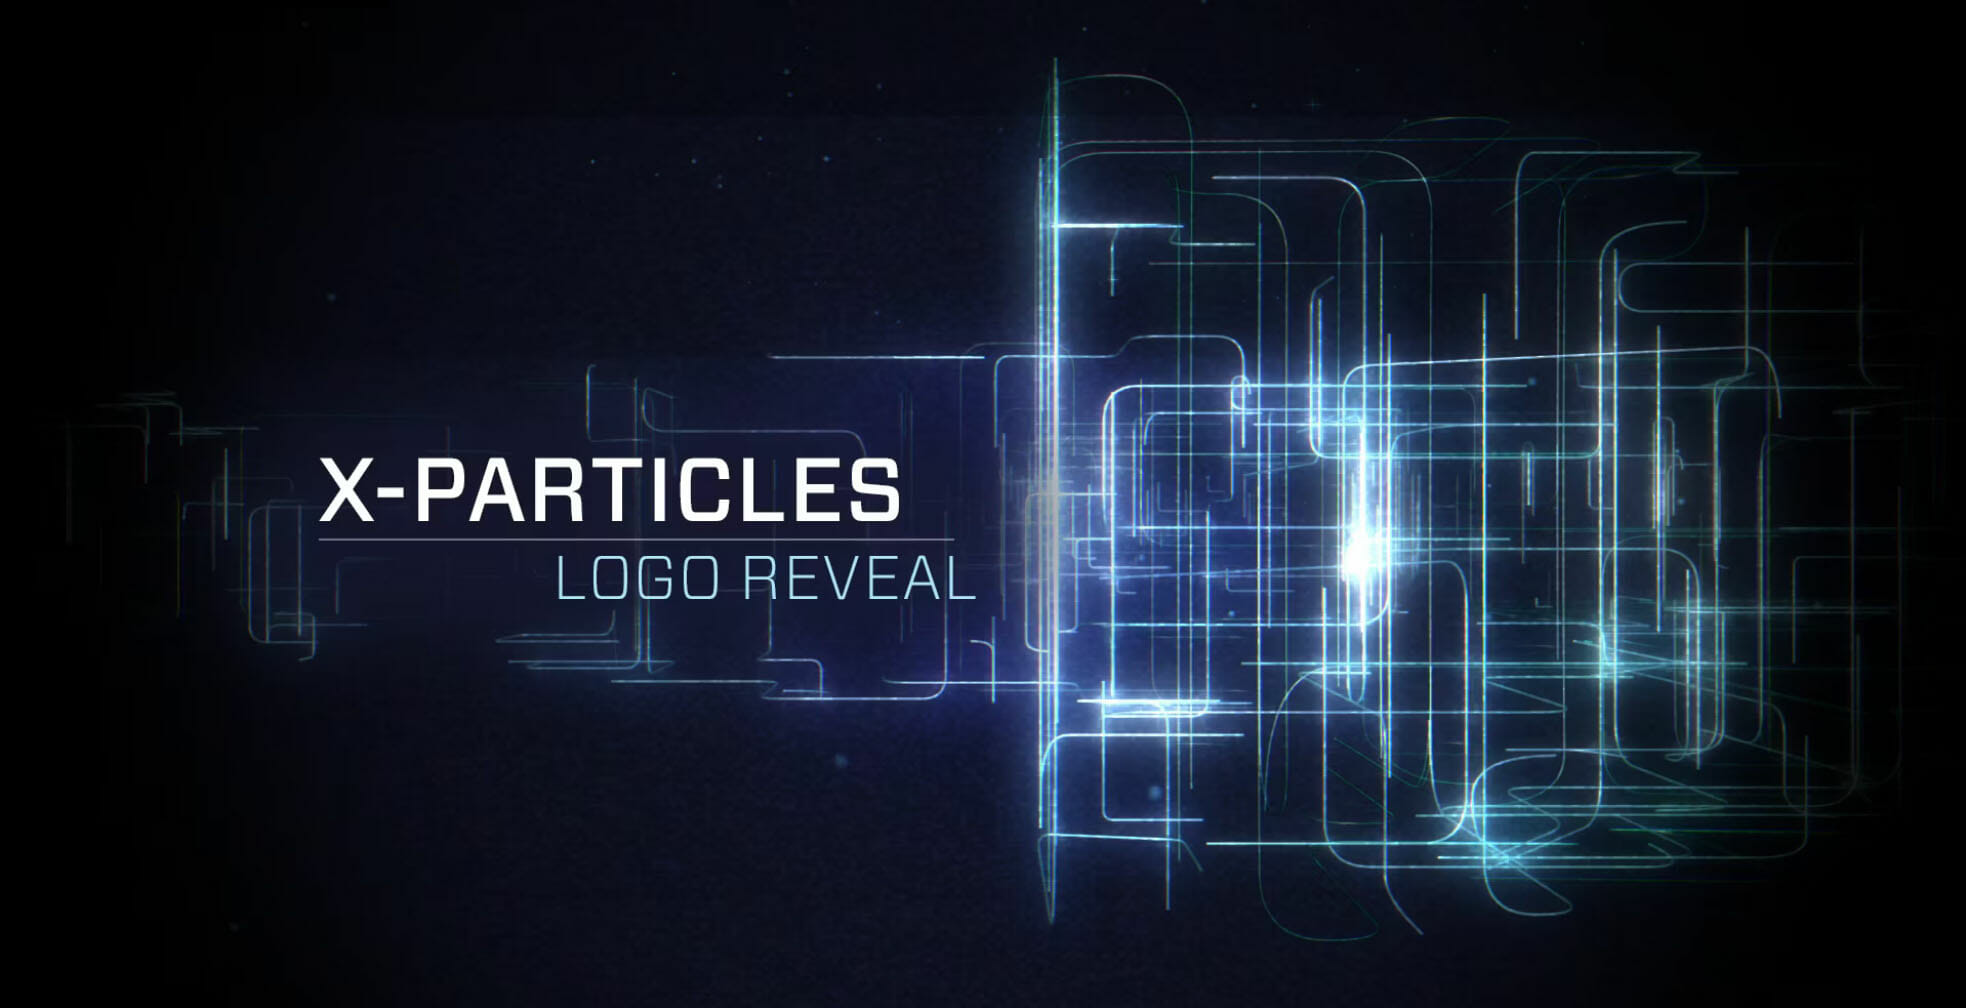 Logo Reveal with X-Particles